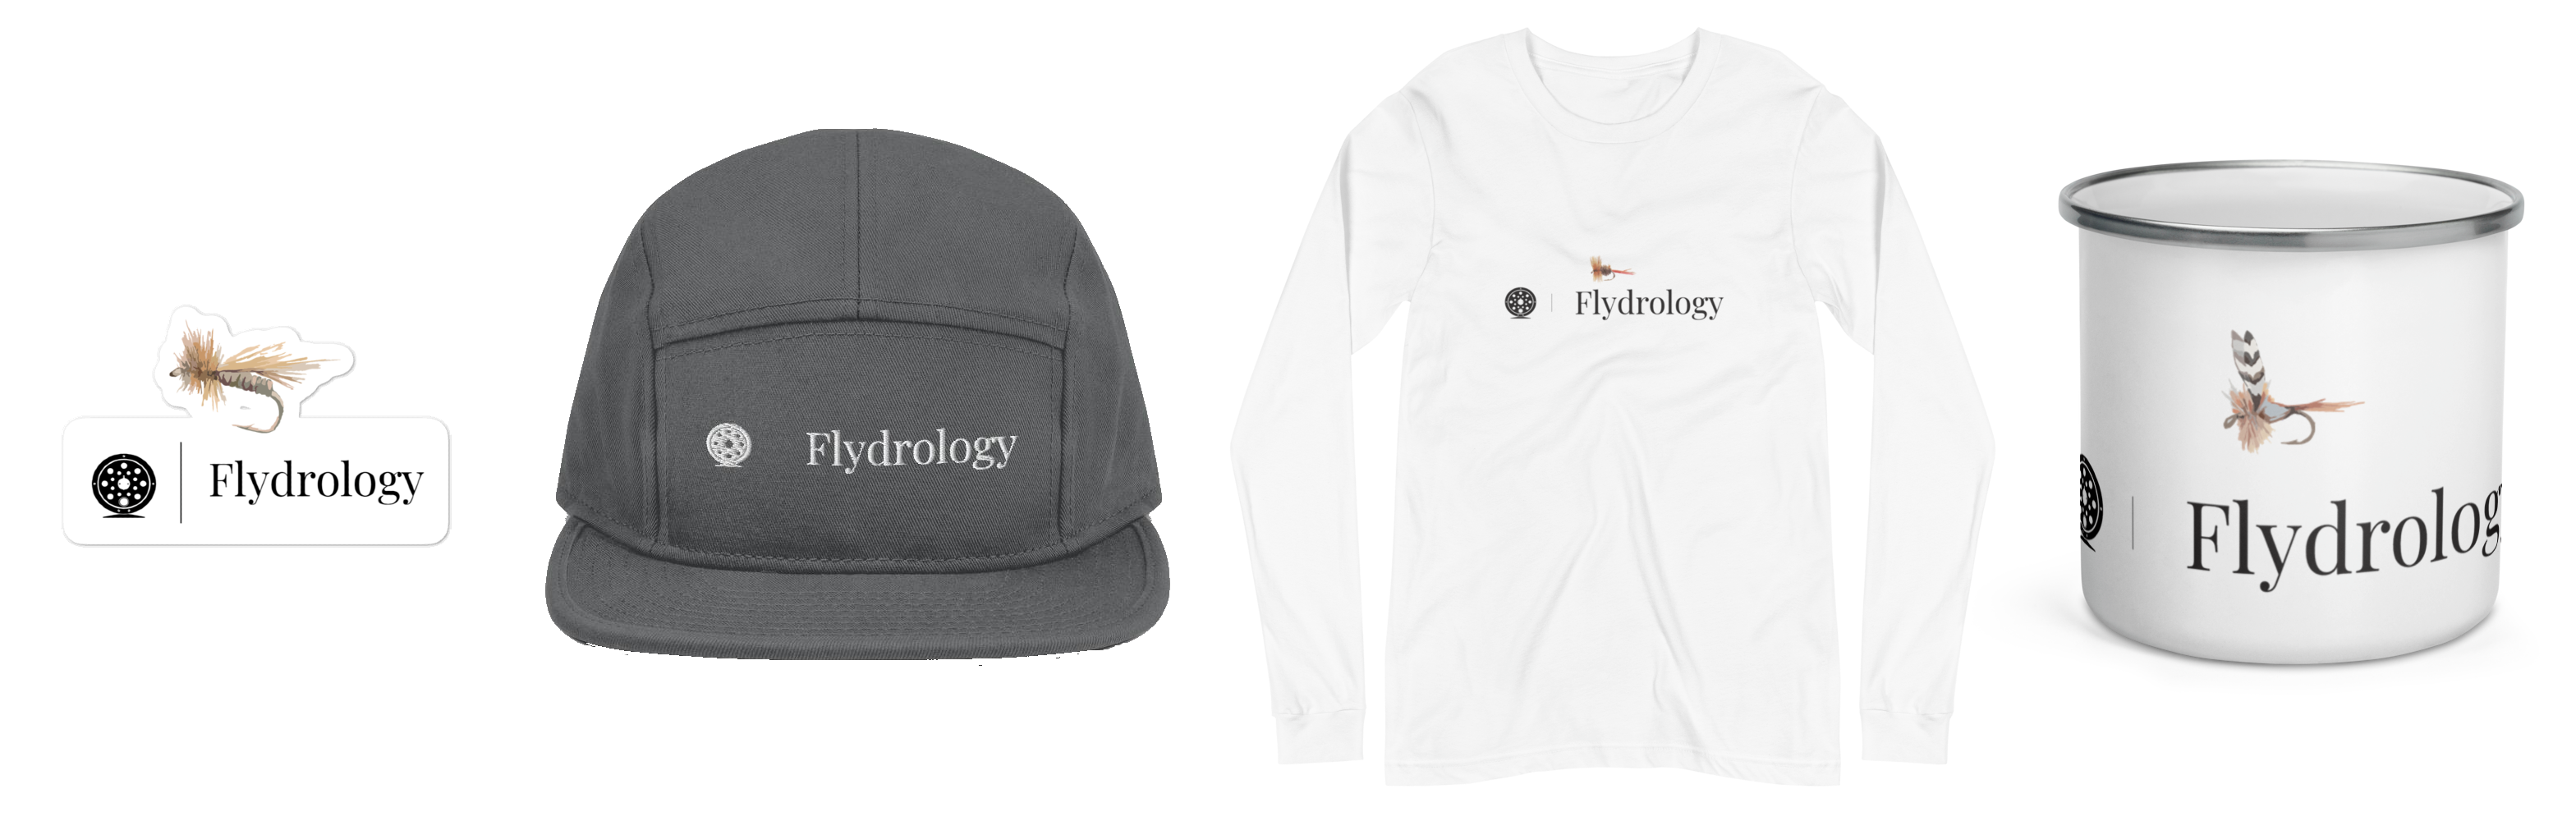 Flydrology - Year of the Rio Sponsor